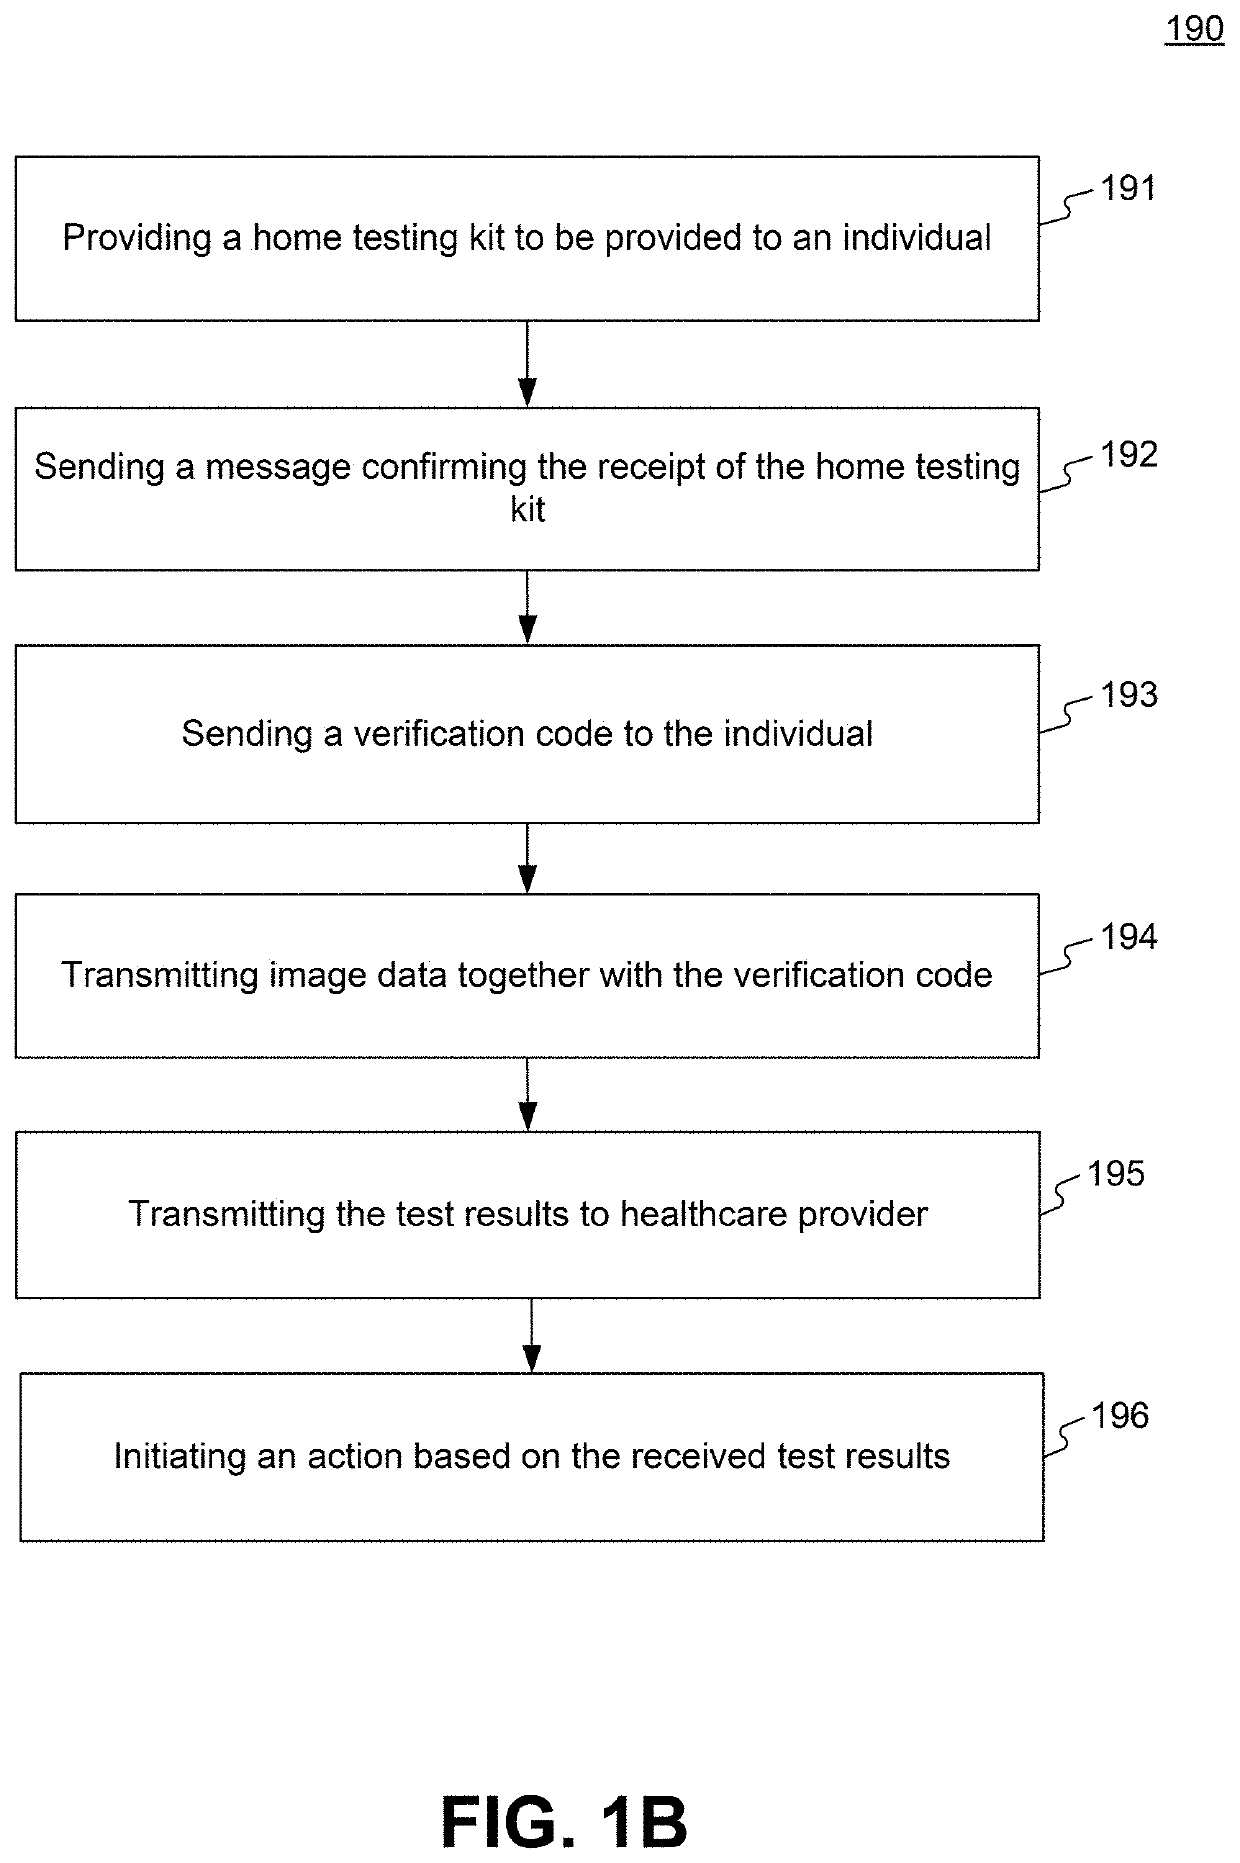 Utilizing personal communications devices for medical testing